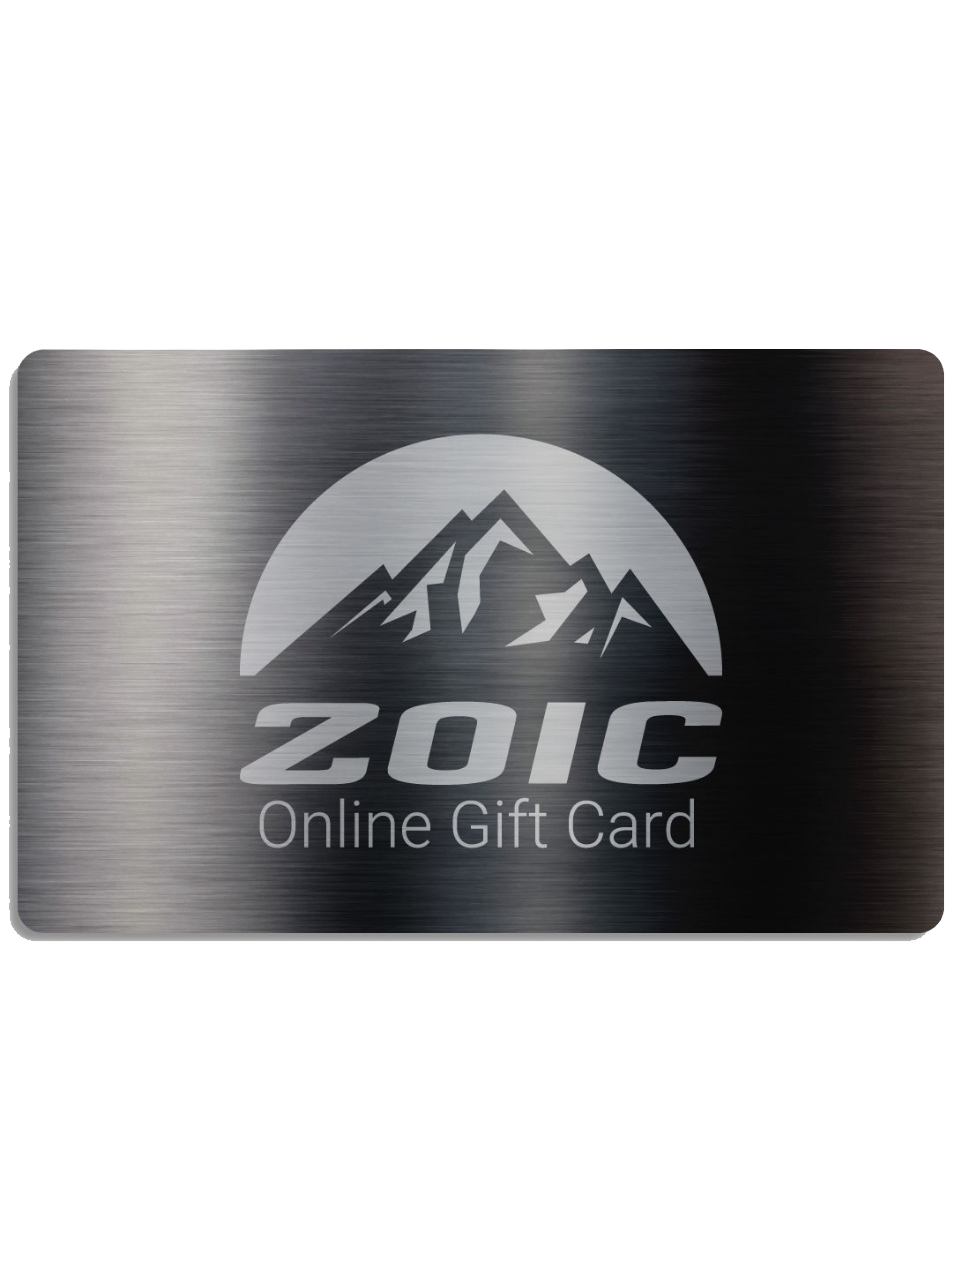 ZOIC Online Gift Card